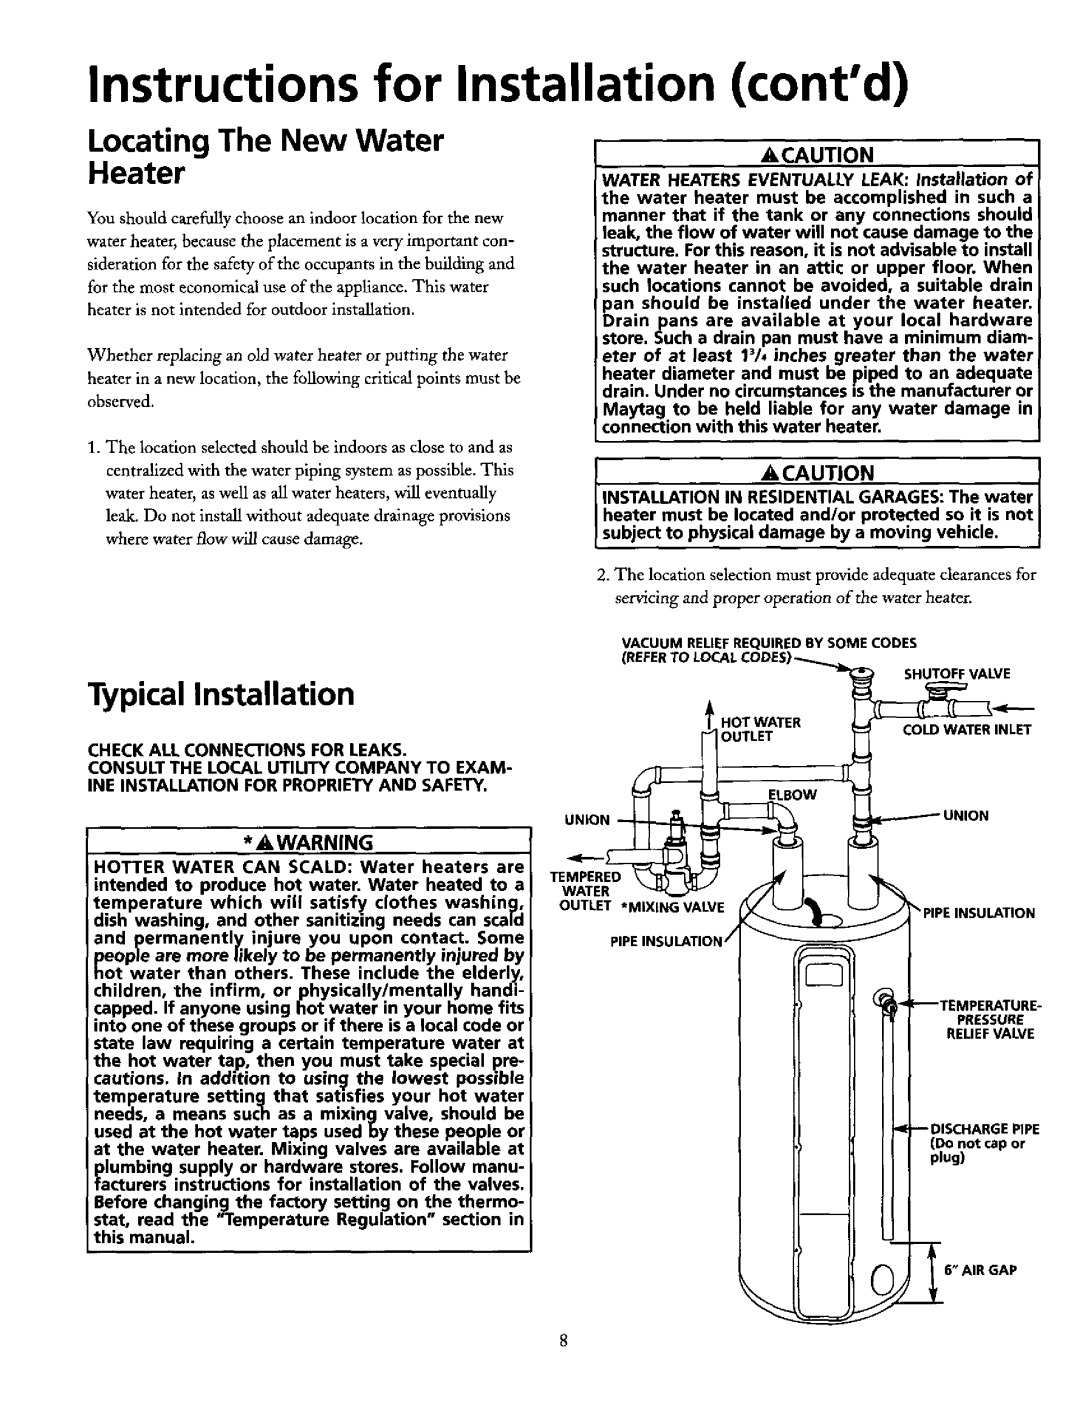 Maytag HE21250PC Instructions for Installation contd, Locating The New Water Heater, Typical Installation, kCAUTION 